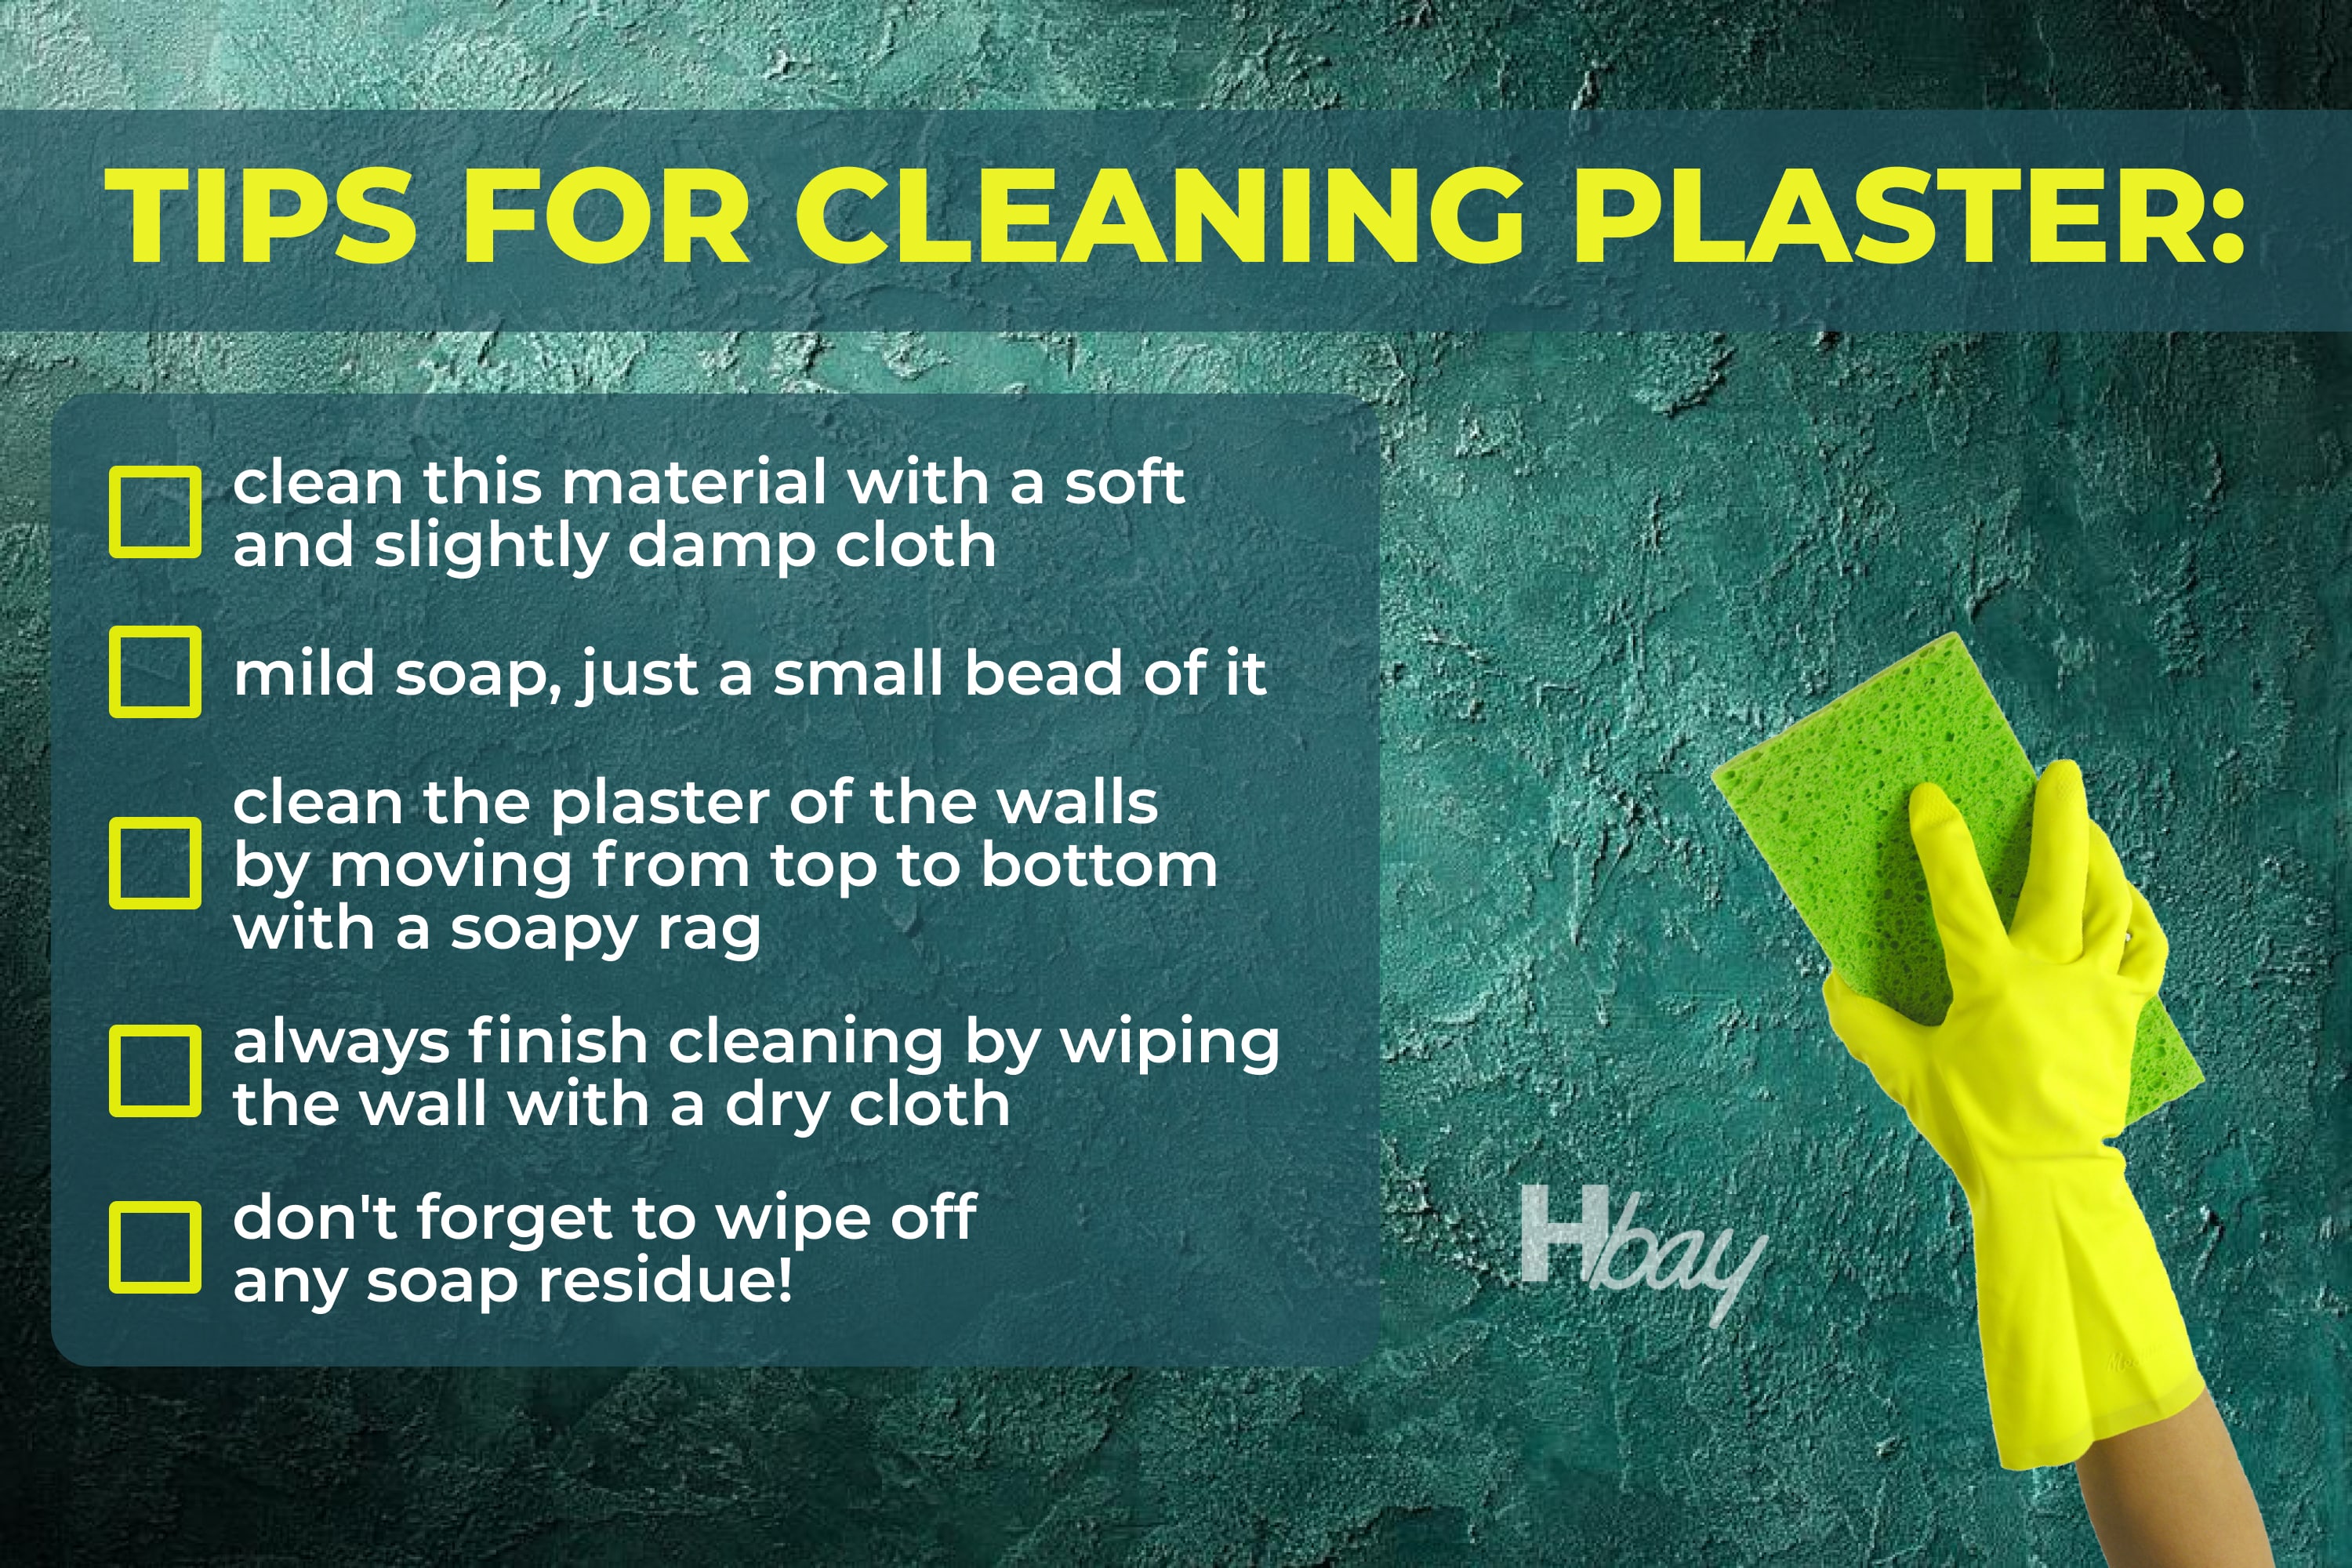 Tips for cleaning plaster